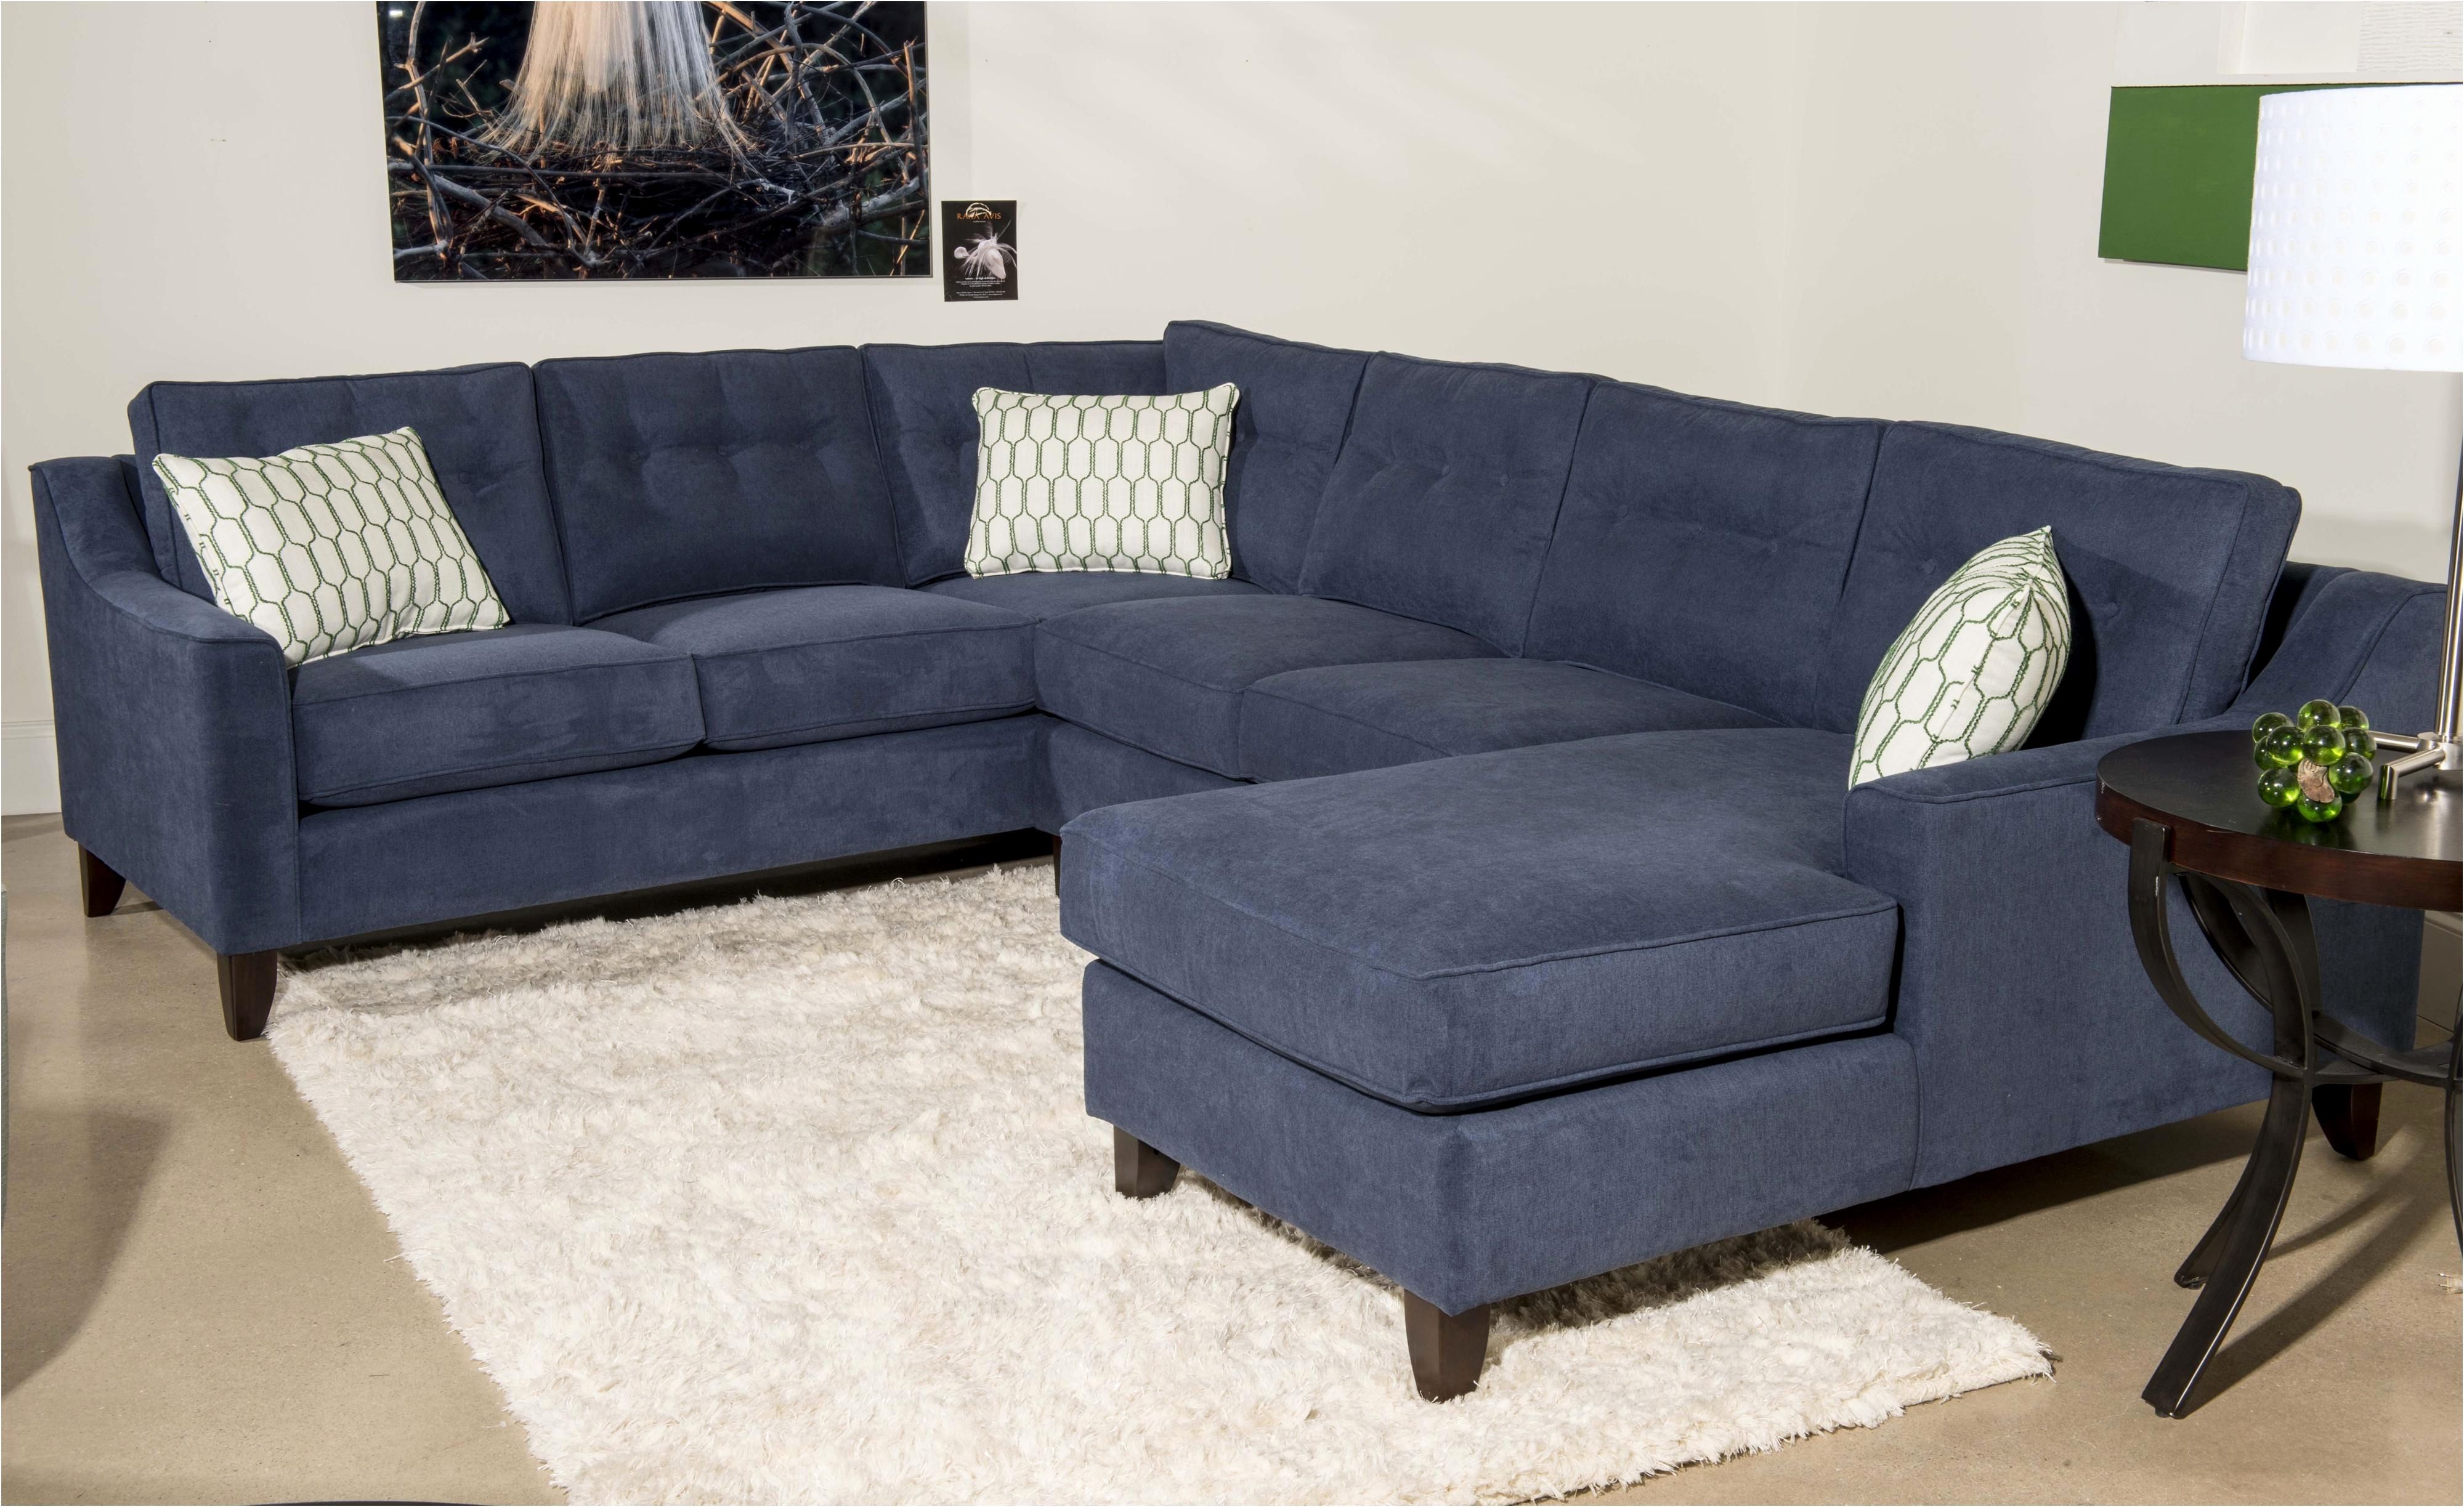 Blue Sectional Sofa Unique Light Leather Within Navy Plan 19 Inside Blue Sectional Sofas (View 11 of 15)